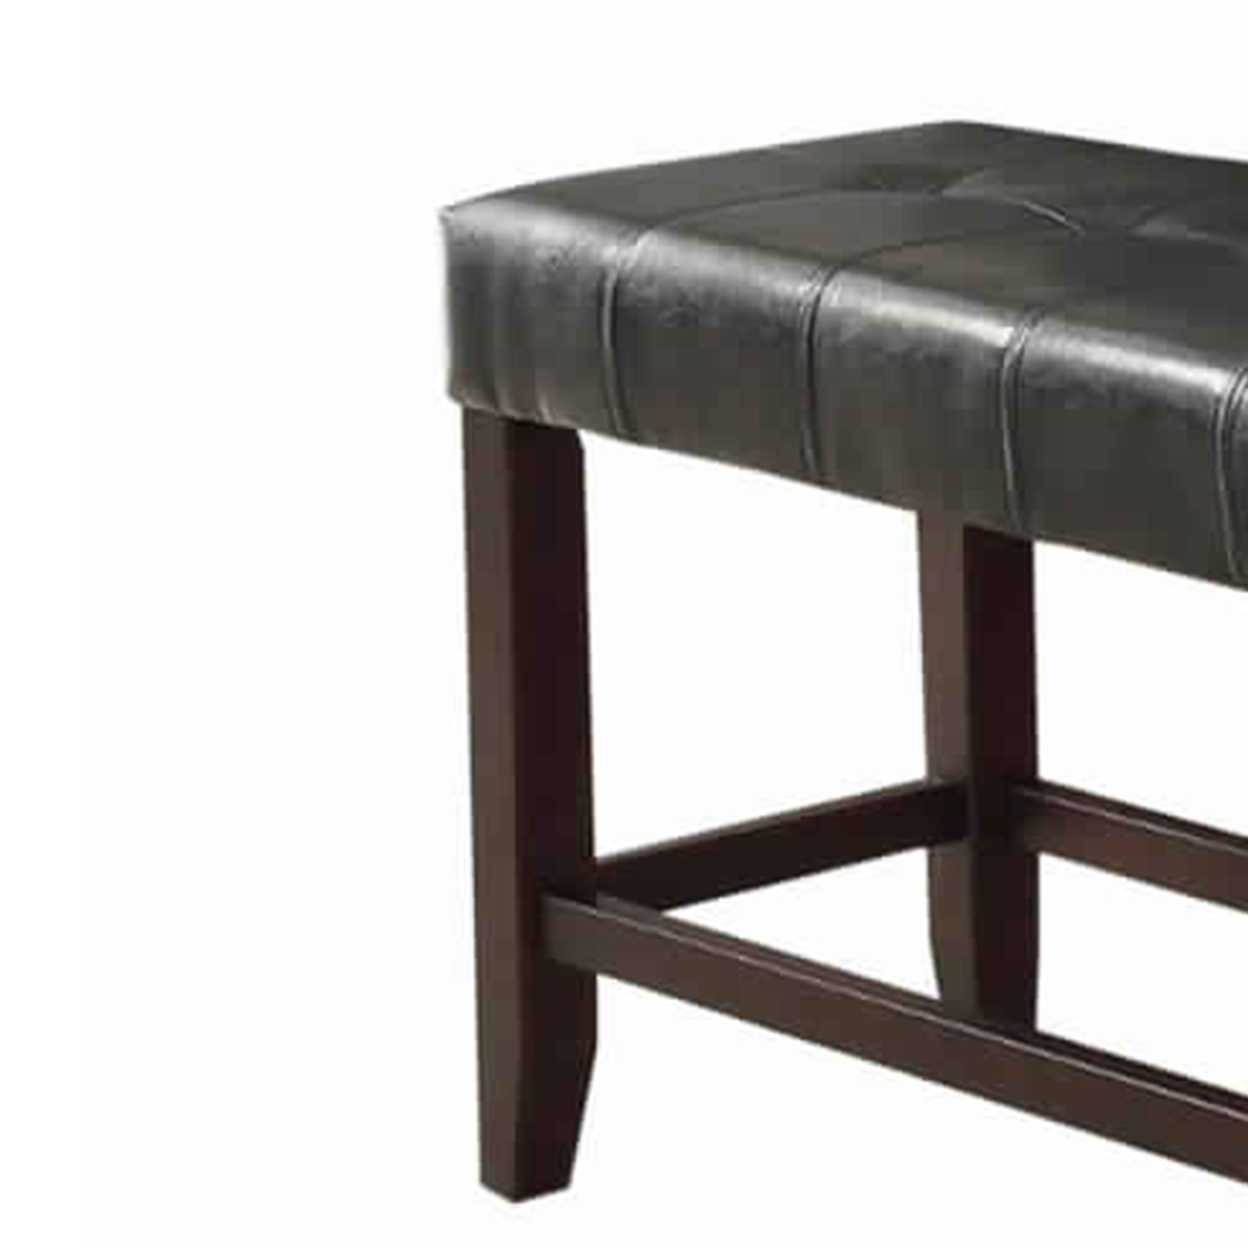 Wood Based High Bench With Tufted Seat Black And Brown- Saltoro Sherpi